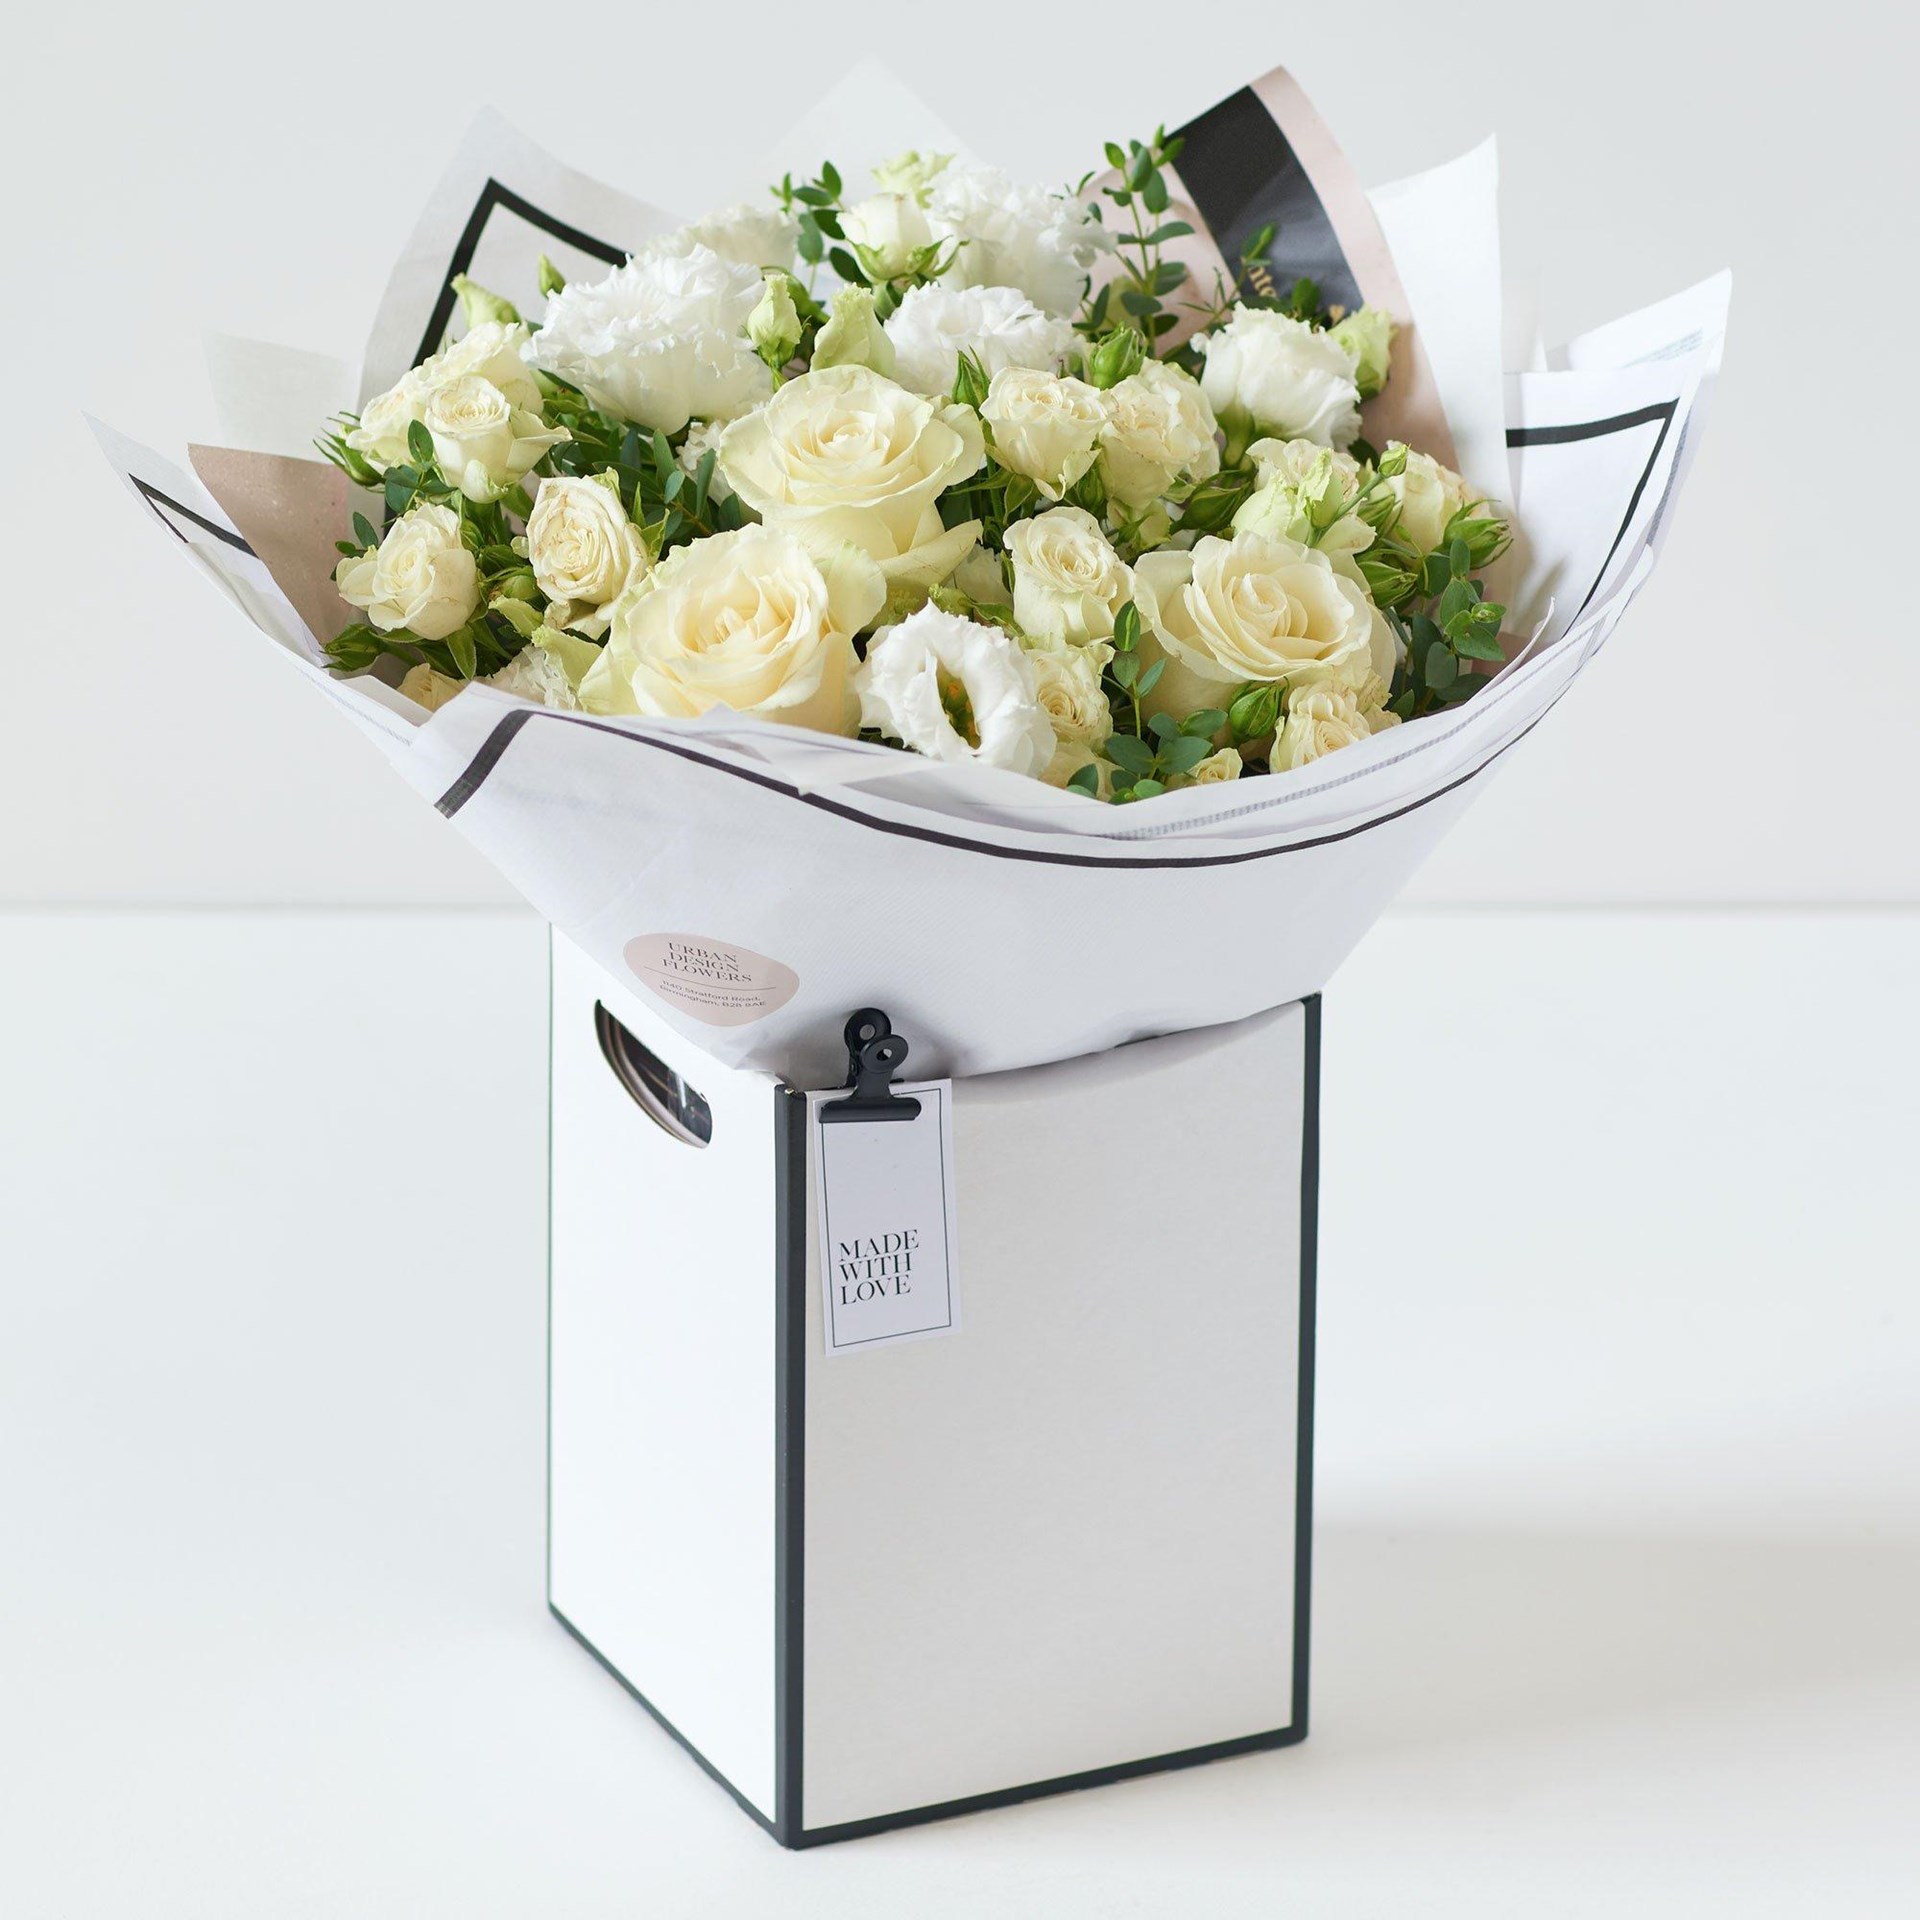 product image for Beautifully Simple White Flower Bouquet.